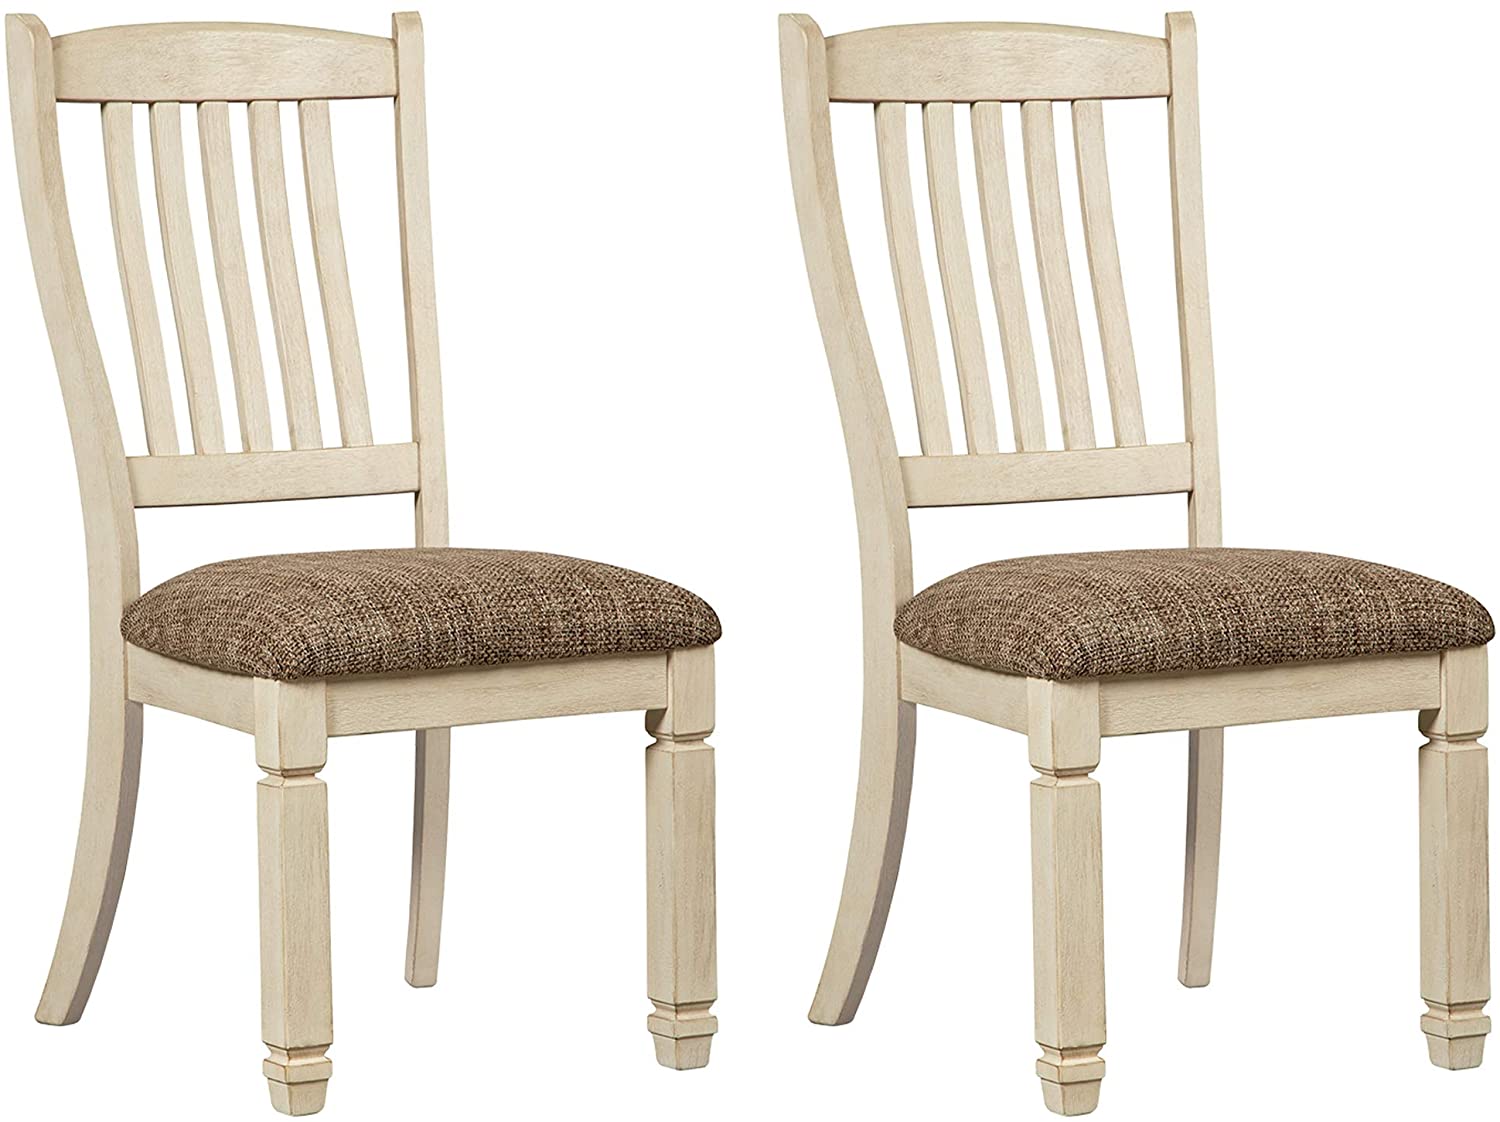 Bolanburg Upholstered Dining Room Chair Set of 2, Antique